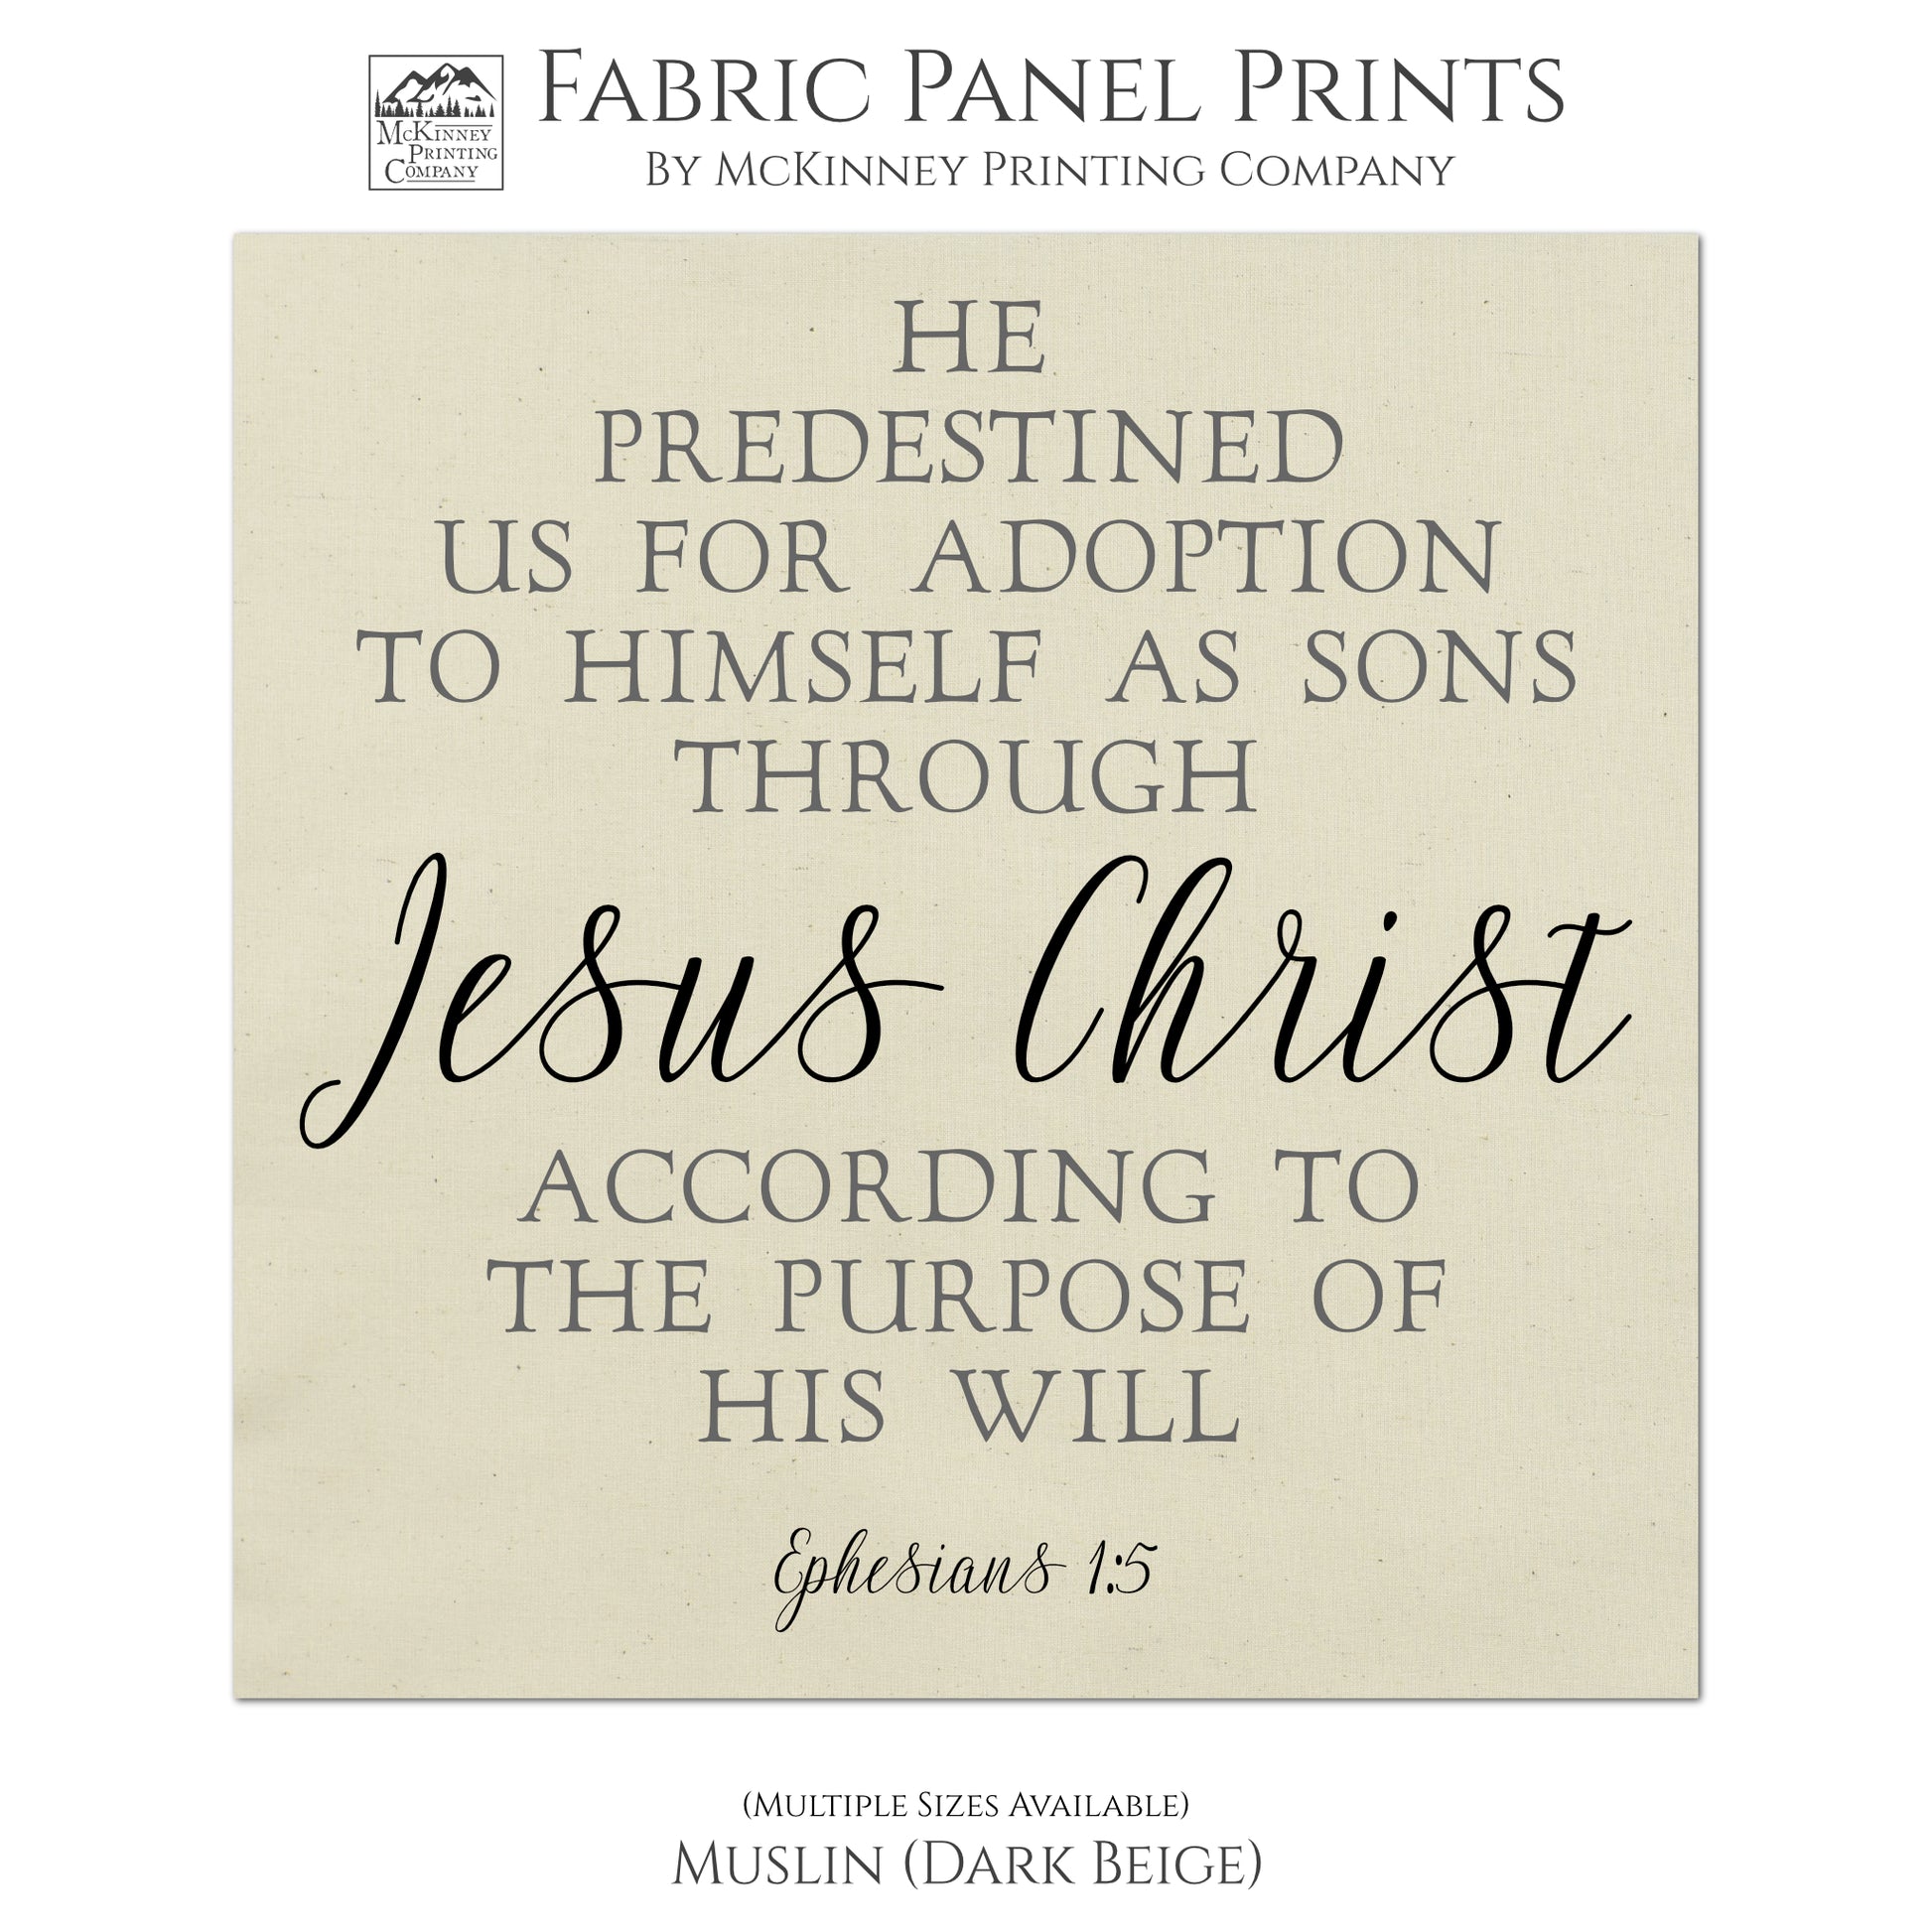 He predestined us for adoption to Himself as sons through Jesus Chris according to the purpose of His will - Ephesians 1 5 - Scripture Fabric - Ephesians 1:5, Jesus Christ, Baptism, First Communion, Quilt Block, Bible Verse, Christian, Confirmation - Muslin